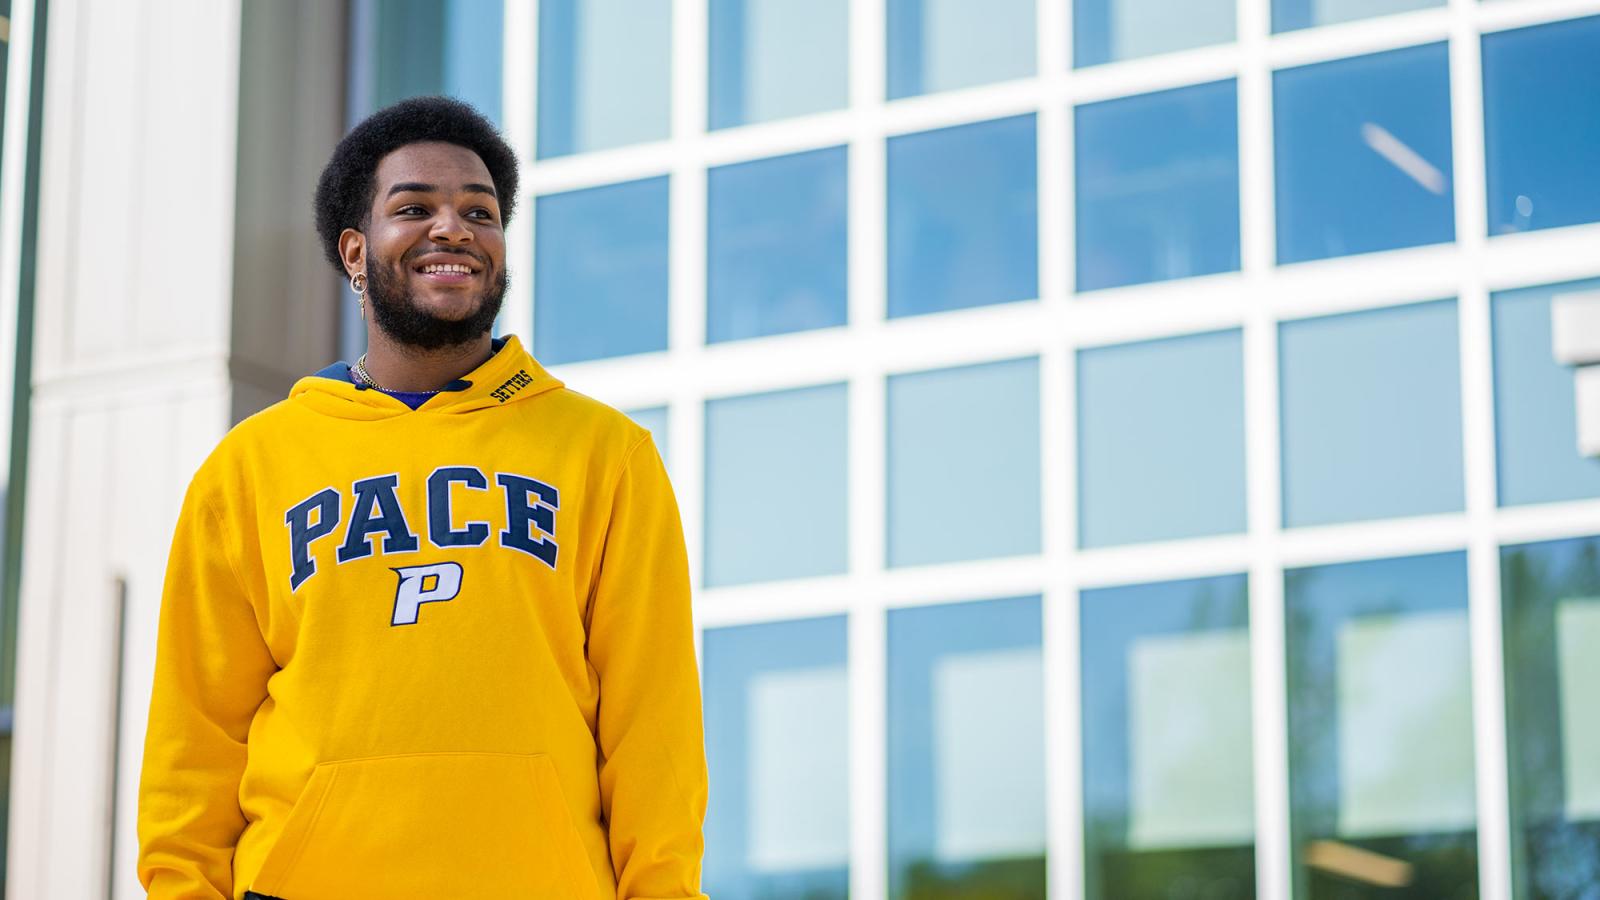 Pace student D'Andre Butler stands in front of a windowed building on the Pleasantville Campus